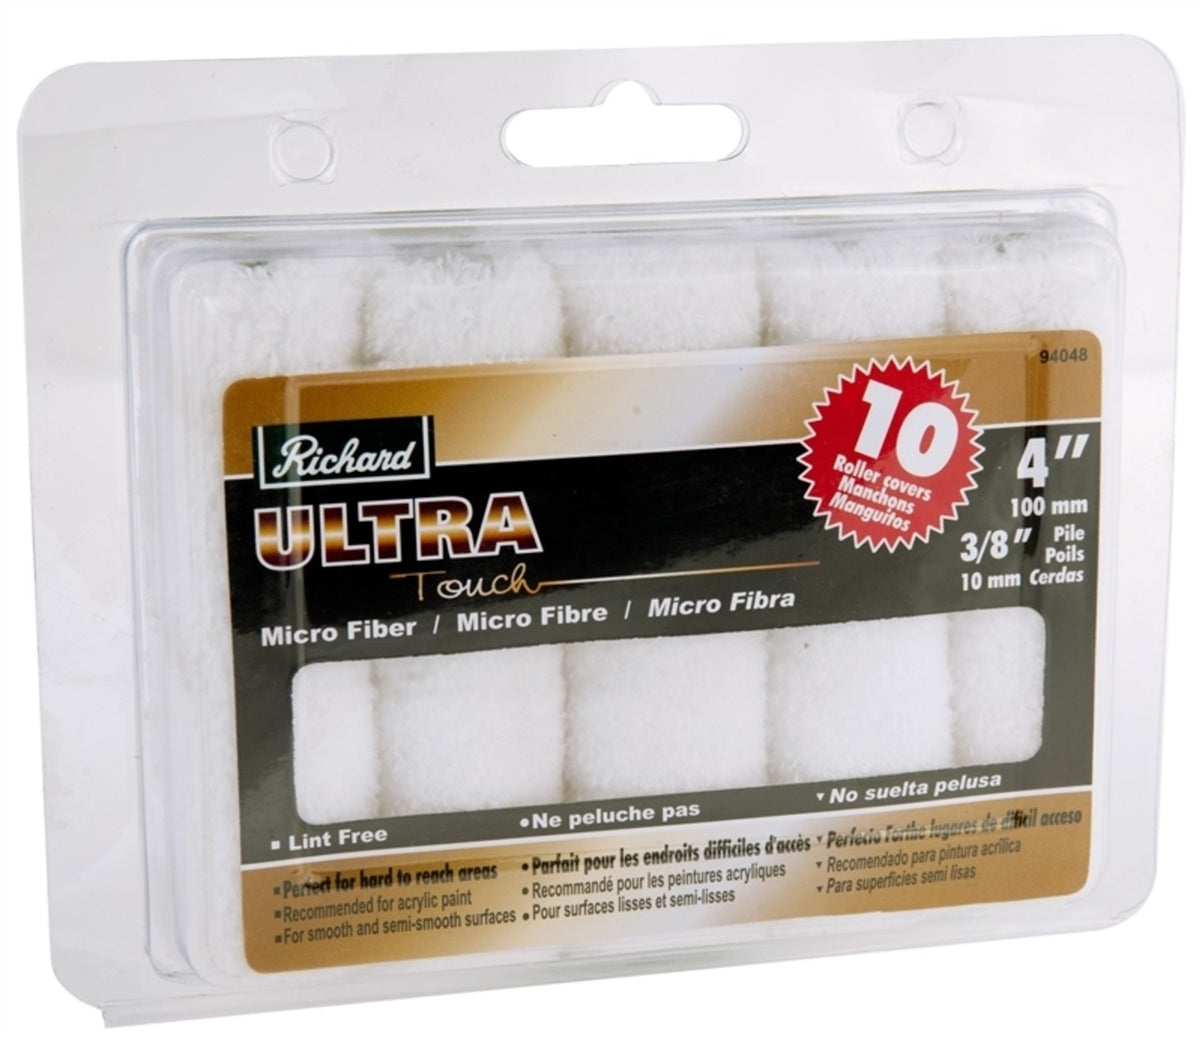 Richard 94048 Ultra Touch Paint Roller Cover, Microfiber